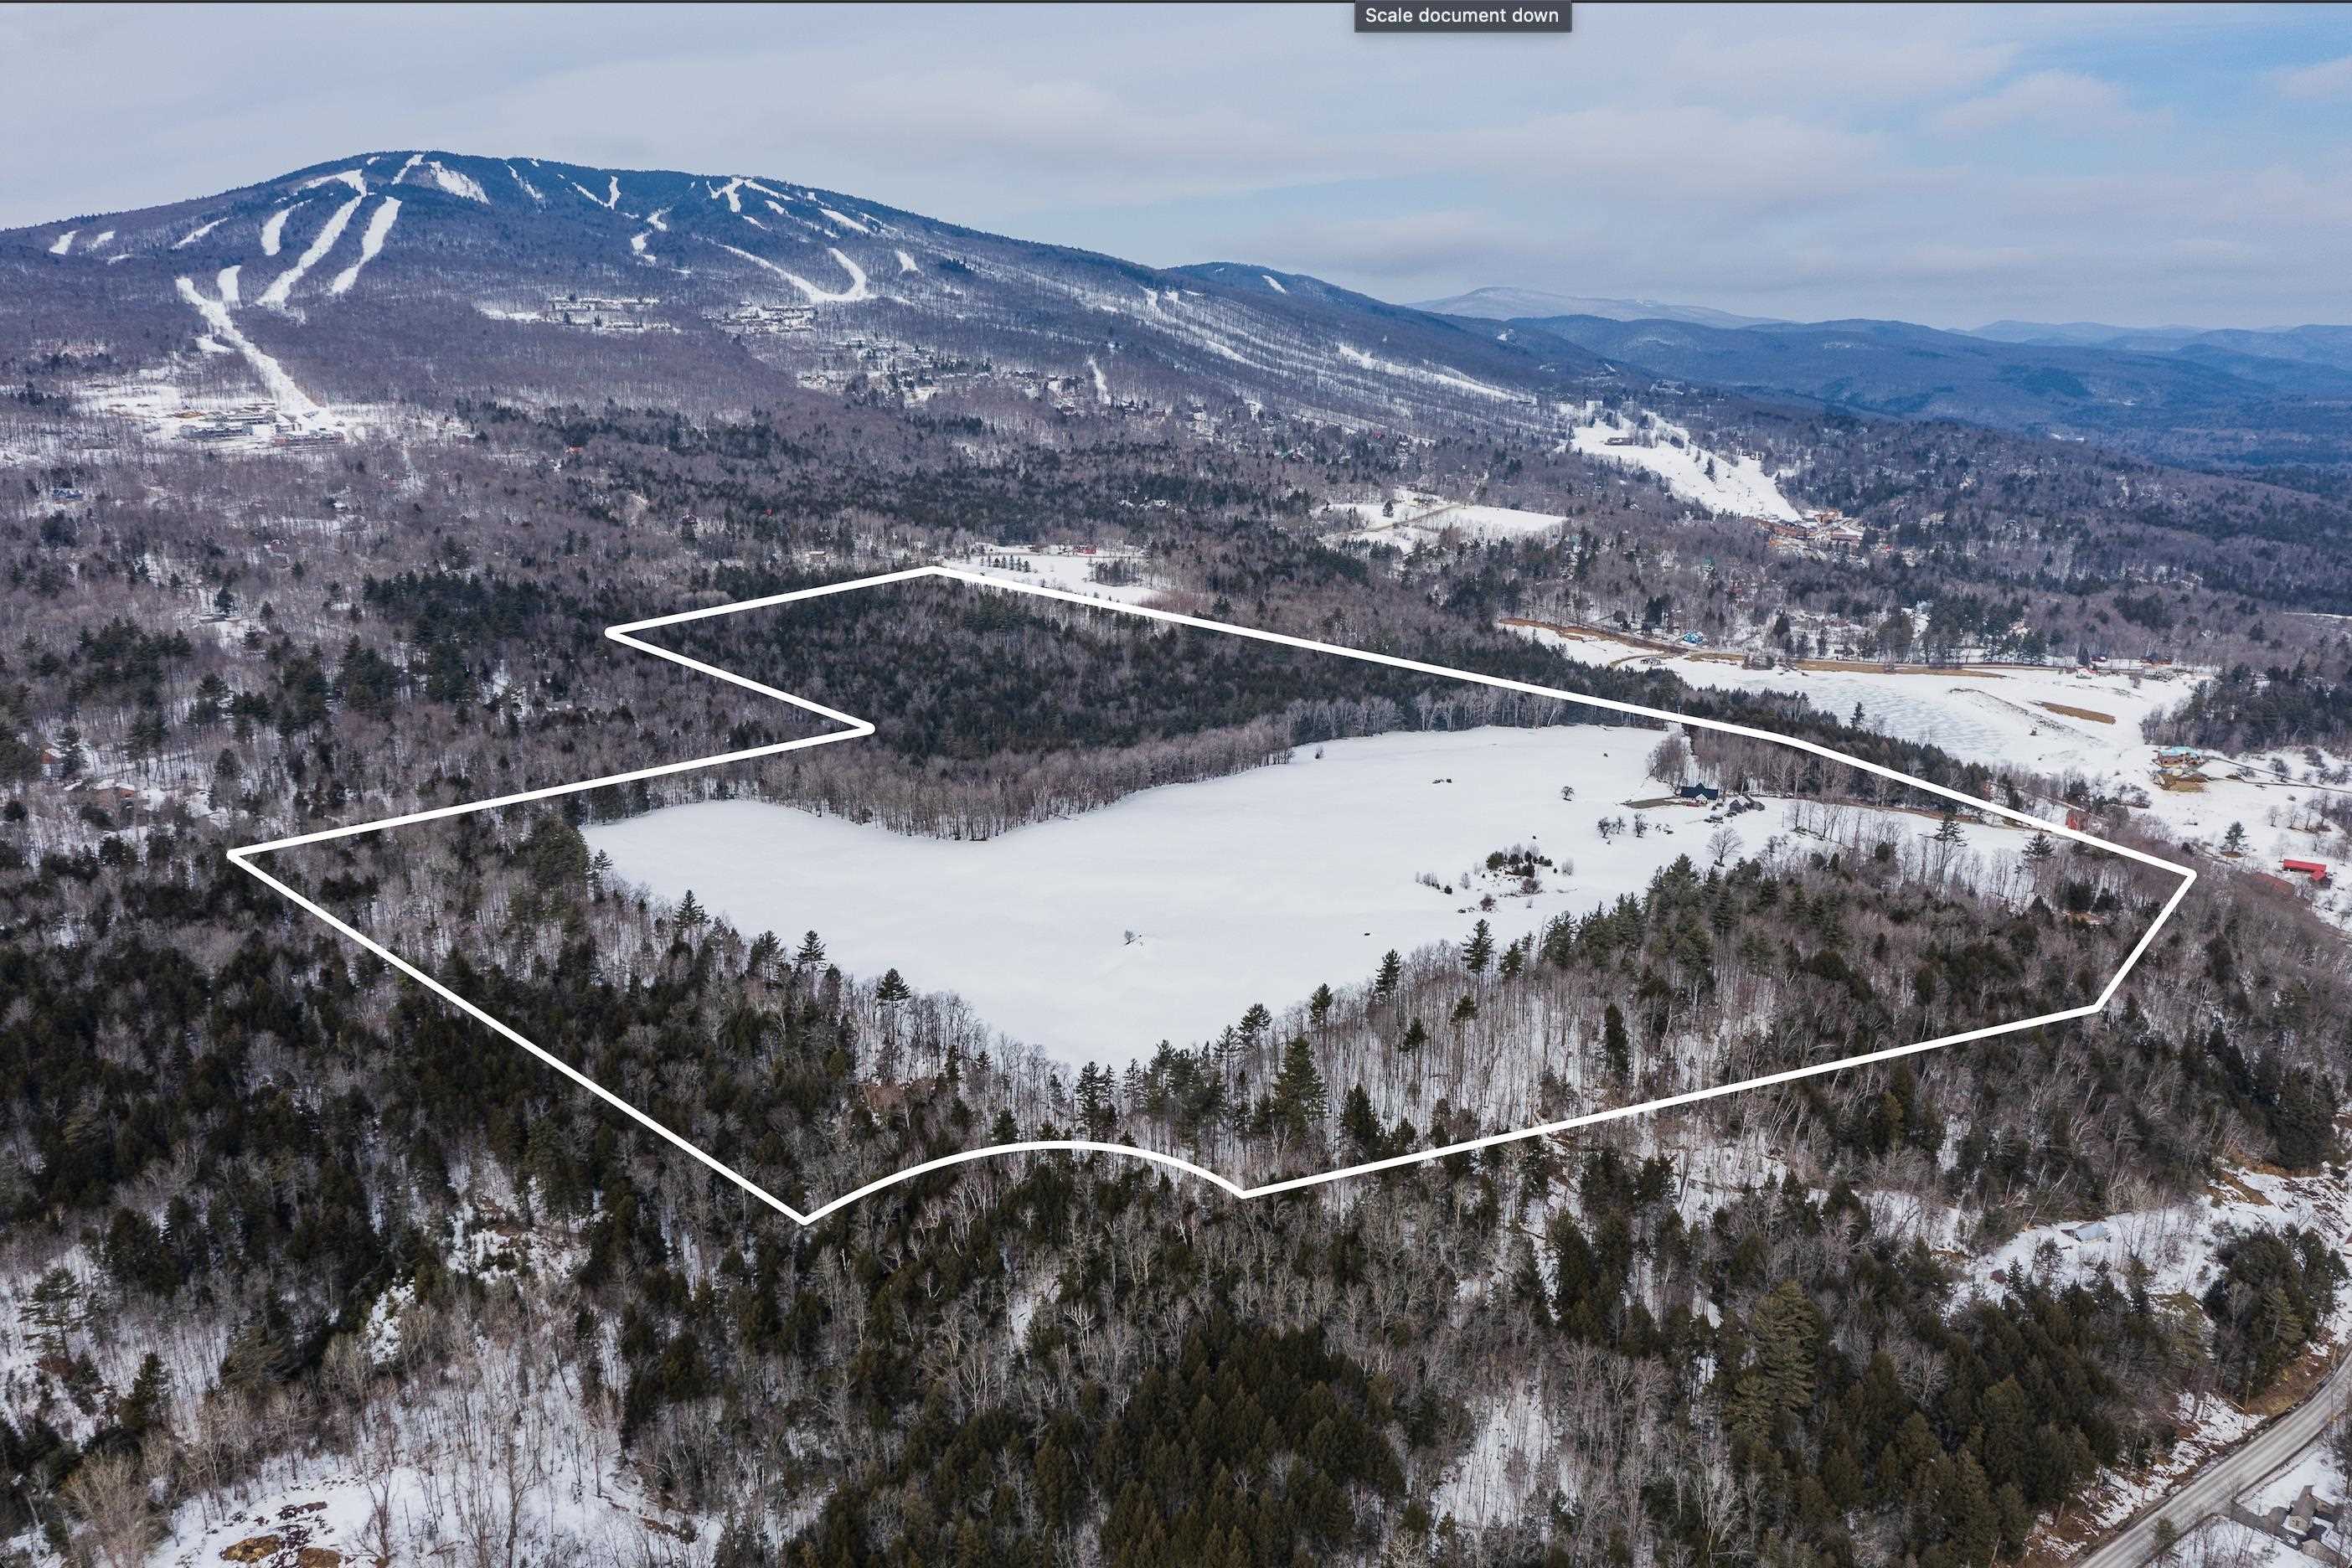 DEVELOPERS AND INVESTORS TAKE NOTICE! Situated on 127 acres at the foot of Okemo Mountain Resort with direct access to South Face Village, this remarkable development opportunity holds endless possibilities. Featuring breathtaking views in every direction, sprawling meadows, & established trails cut throughout the wooded forest, it is an opportunity that brings a plethora of options for future development. Its unique potential spans from crafting a luxurious single-family enclave to developing a vibrant ski neighborhood of condos & townhouses, or even establishing commercial hotels catering to winter enthusiasts flocking to Vail owned Okemo. Minutes from downtown Ludlow, future residents will relish the convenience & easy access, merging the beautiful Vermont lifestyle the land provides to the opulence of high-end ski resort proximity. The acreage also provides direct access to the VAST Trail, incorporating all the outdoor activities one could ask for from cross country skiing to ATV adventures & everything in between. With an updated 5 bedroom, 2 bathroom farmhouse already on site with accompanying barn, the options continue to grow as occupying the home as you build your dream residence elsewhere on site is well within the realm of possibility. With extensive planning, research, engineering, & appraisals already complete & awaiting your review, you won't want to miss this once-in-a-lifetime opportunity. Reach out today and dive deeper into this spectacular opportunity.